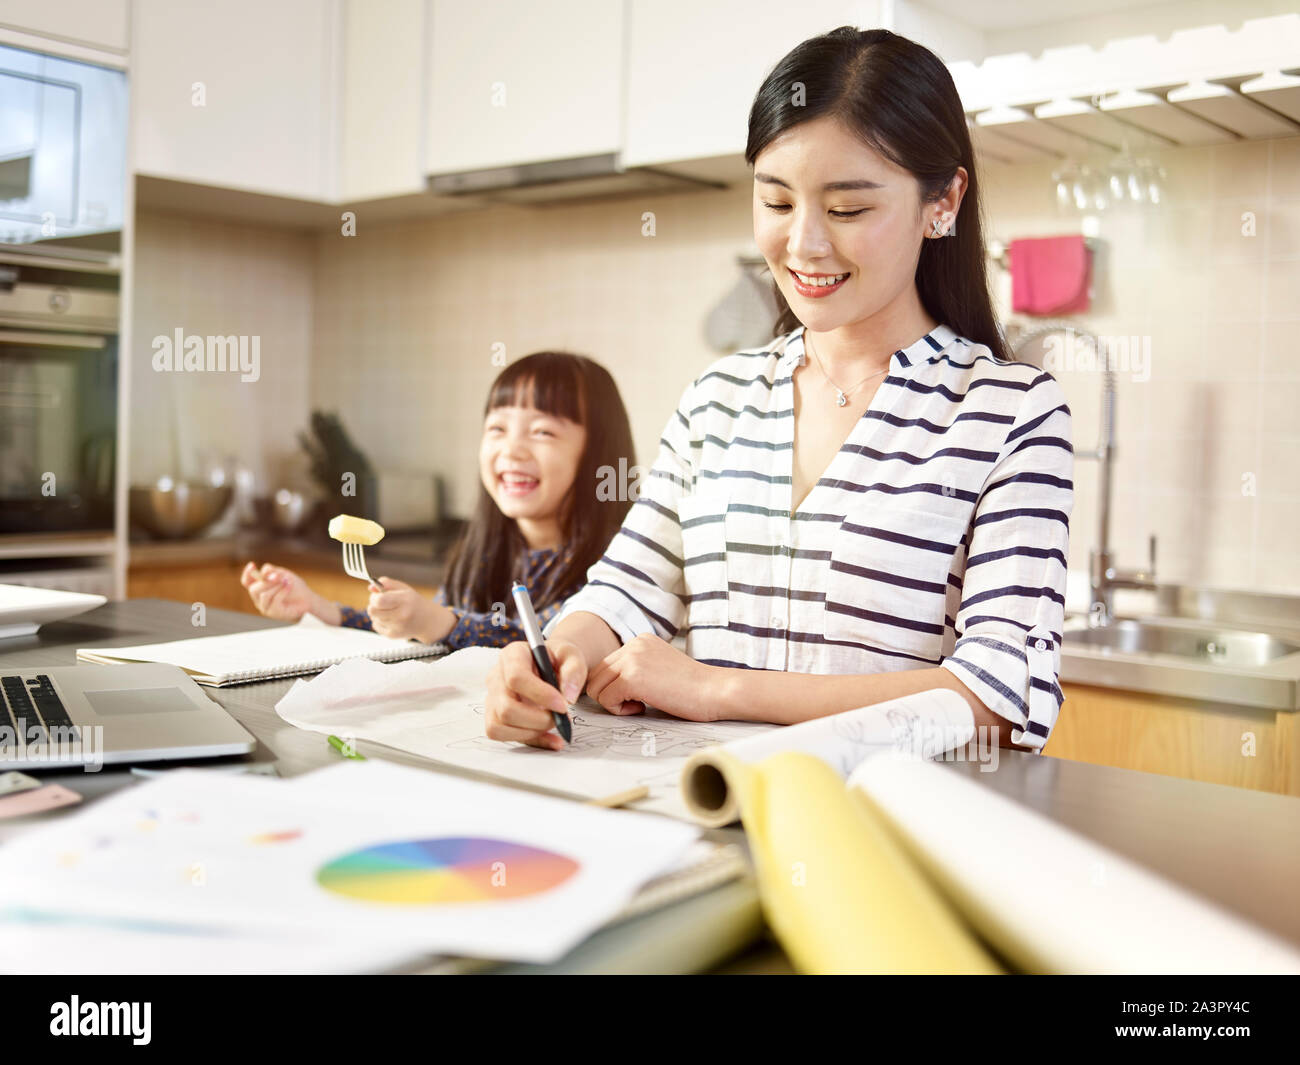 young asian design professional mother working at home while taking care of daughter. Stock Photo